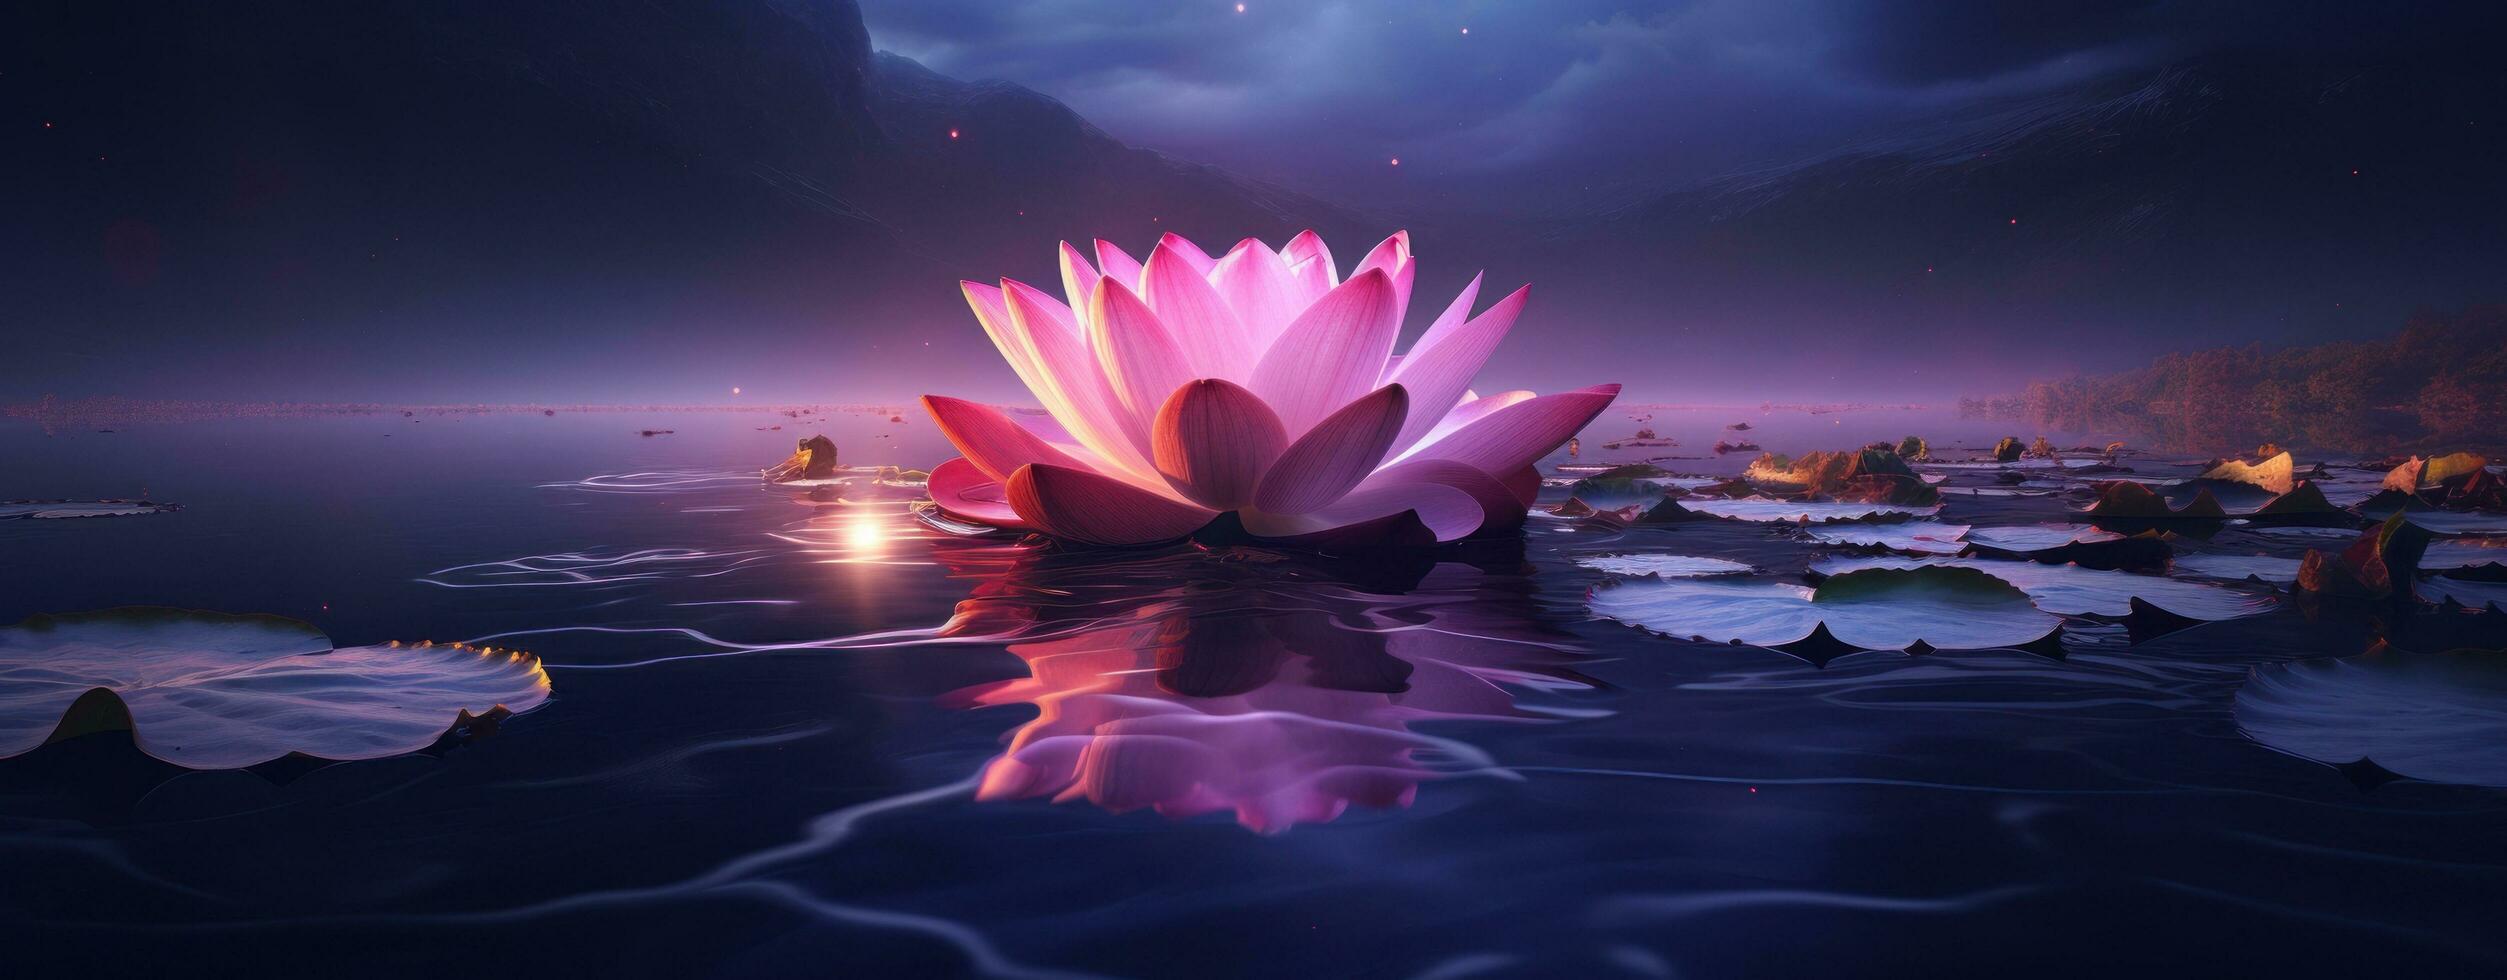 Lake with beautiful water lilies and rocks photo